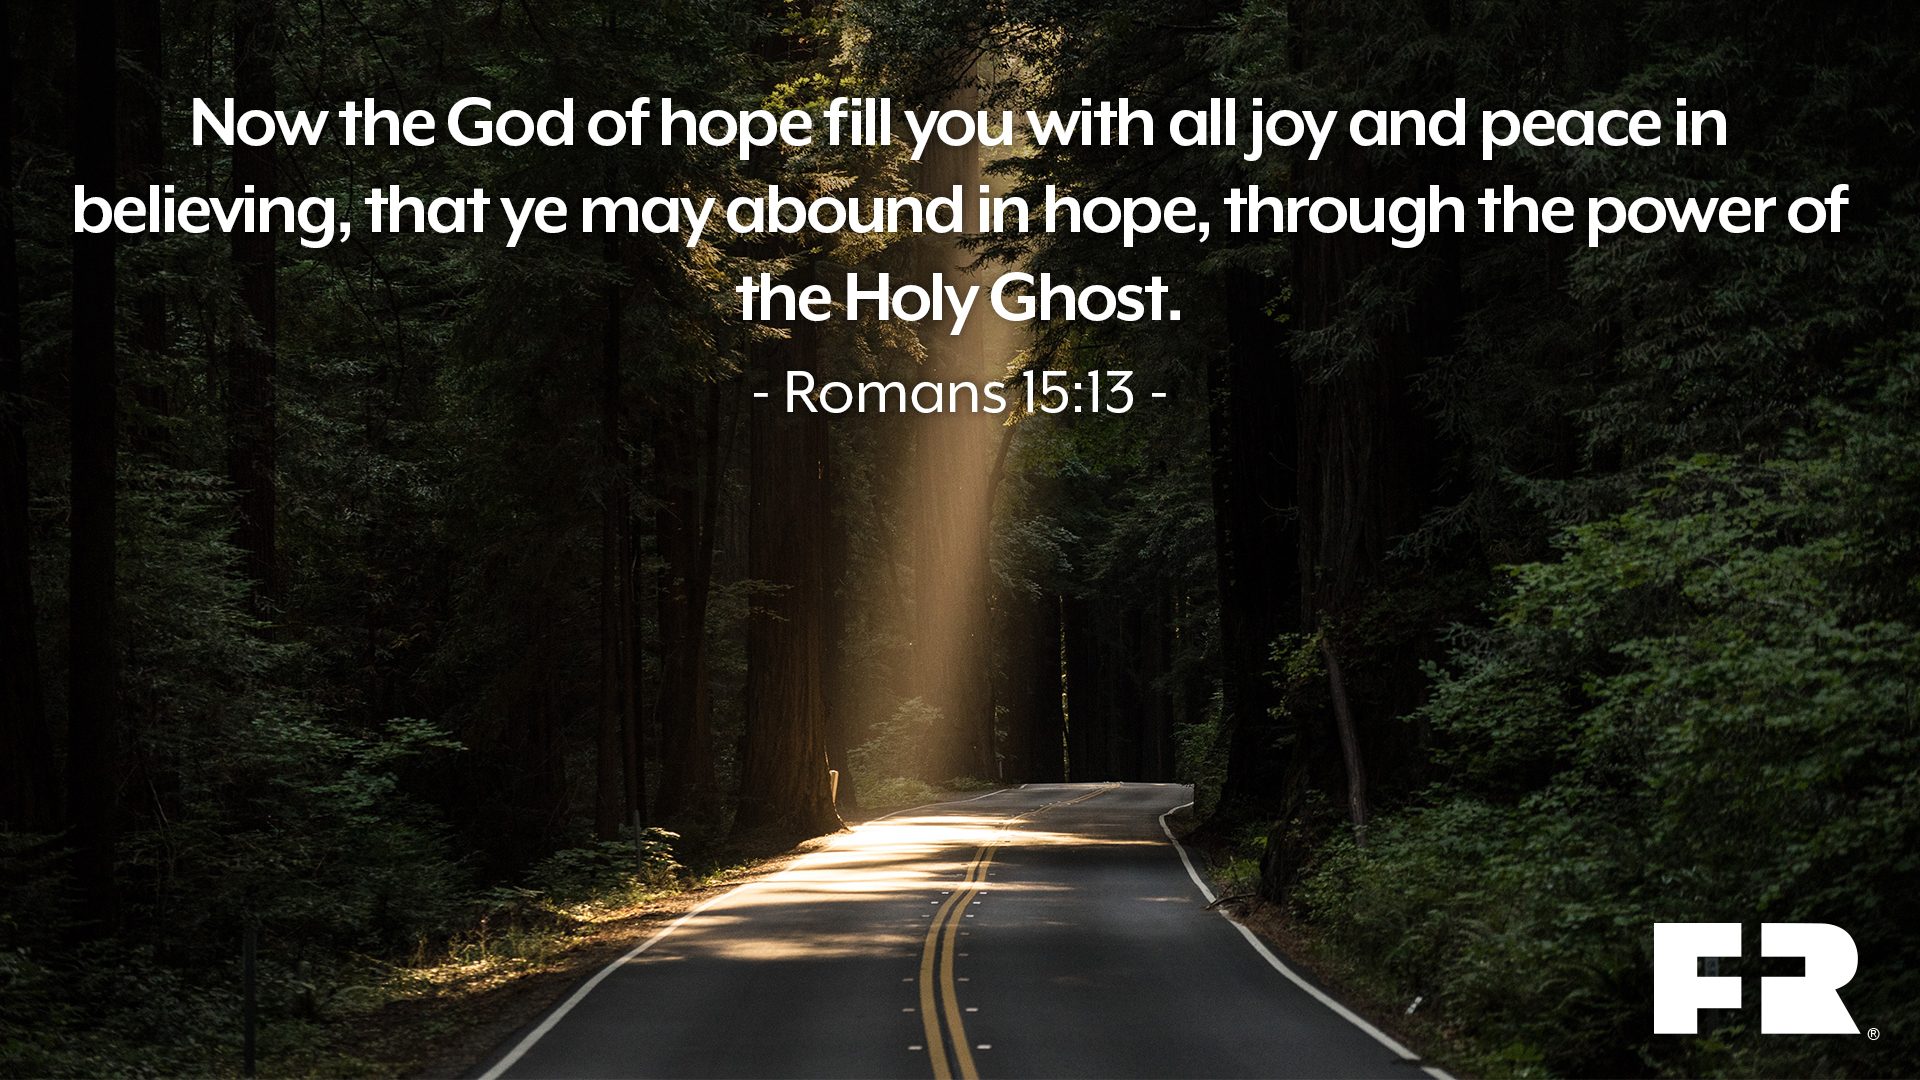 "Now the God of hope fill you with all joy and peace in believing, that ye may abound in hope, through the power of the Holy Ghost."